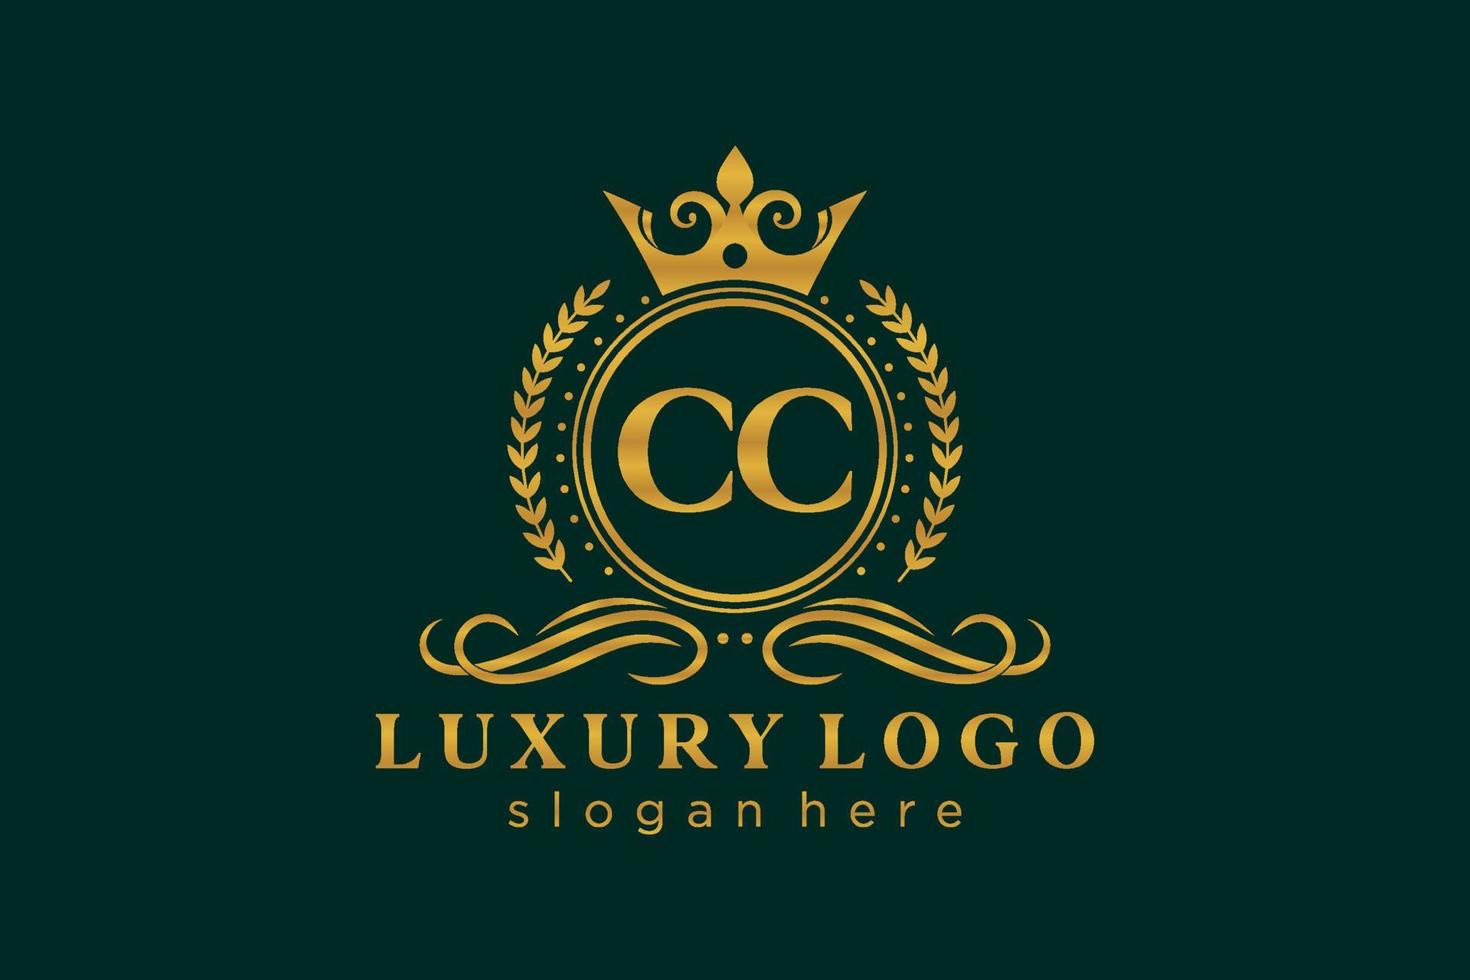 Initial CC Letter Royal Luxury Logo template in vector art for Restaurant, Royalty, Boutique, Cafe, Hotel, Heraldic, Jewelry, Fashion and other vector illustration.